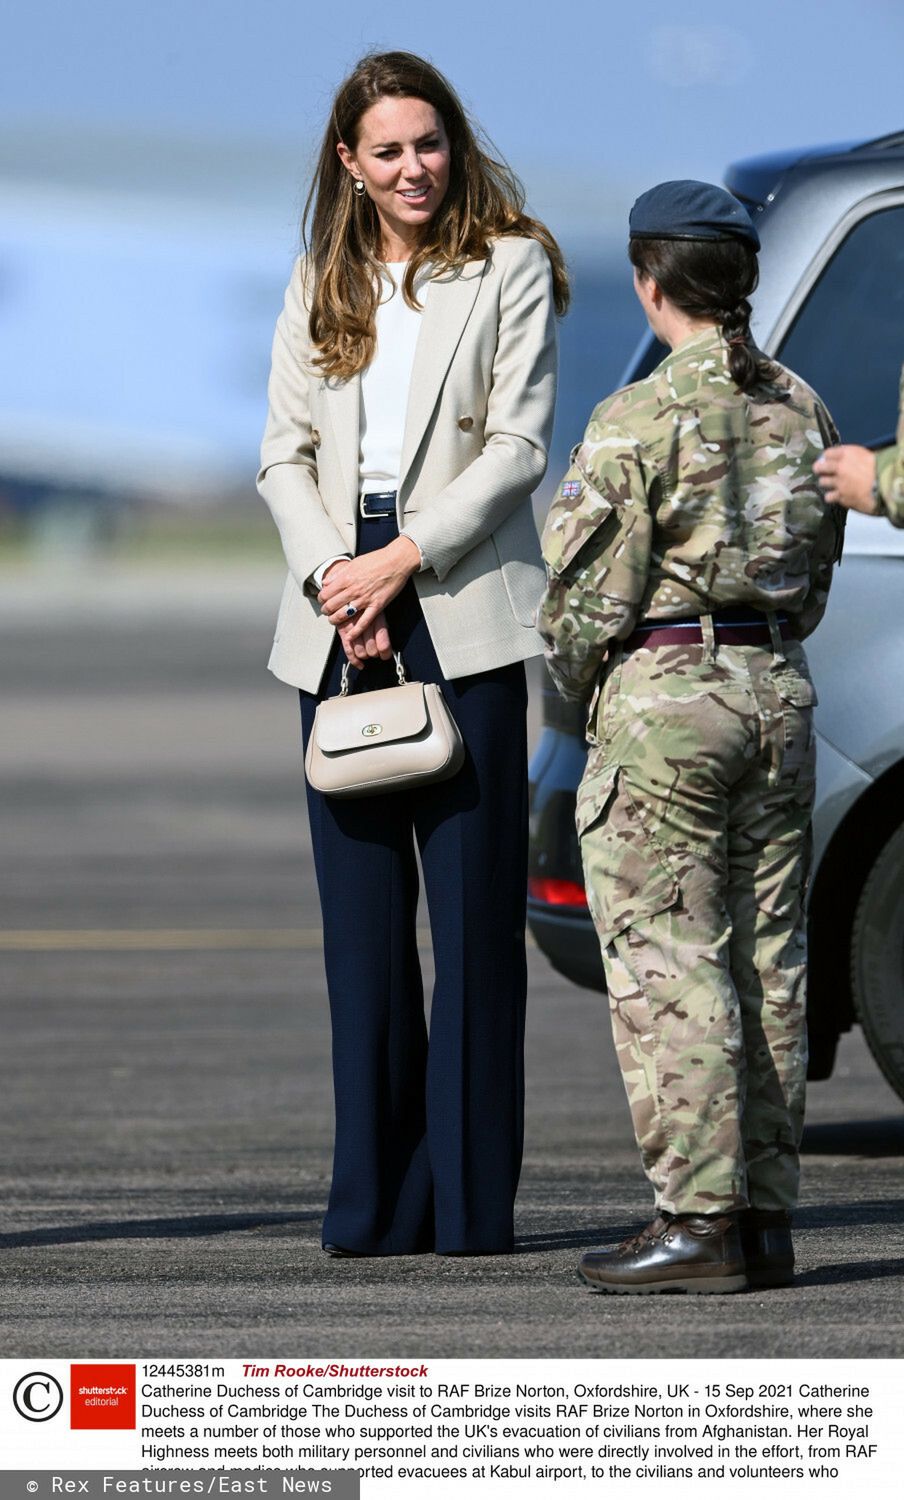 Mandatory Credit: Photo by Tim Rooke/Shutterstock (12445381m)  Catherine Duchess of Cambridge  Catherine Duchess of Cambridge visit to RAF Brize Norton, Oxfordshire, UK - 15 Sep 2021  The Duchess of Cambridge visits RAF Brize Norton in Oxfordshire, where she meets a number of those who supported the UK's evacuation of civilians from Afghanistan. Her Royal Highness meets both military personnel and civilians who were directly involved in the effort, from RAF aircrew and medics who supported evacuees at Kabul airport, to the civilians and volunteers who established a Repatriation Centre at RAF Brize Norton providing key supplies and support on their arrival into the UK.